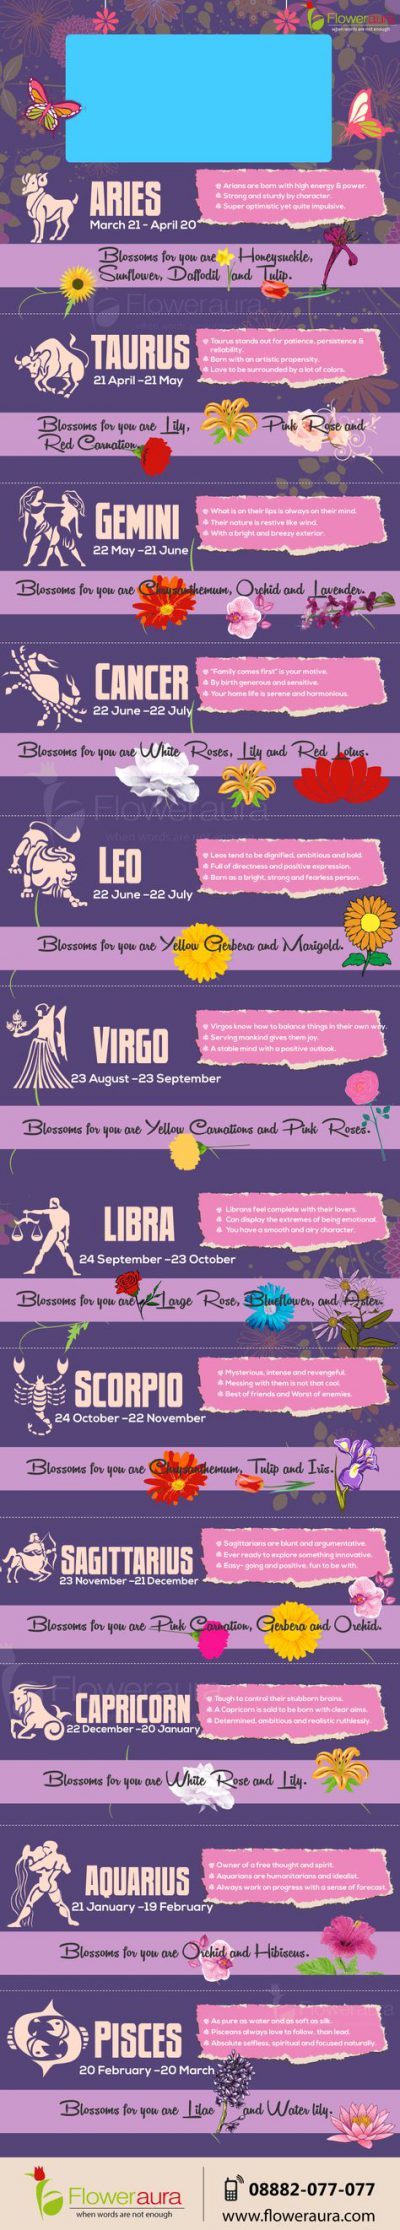 Flowers For Your Zodiac Sign!